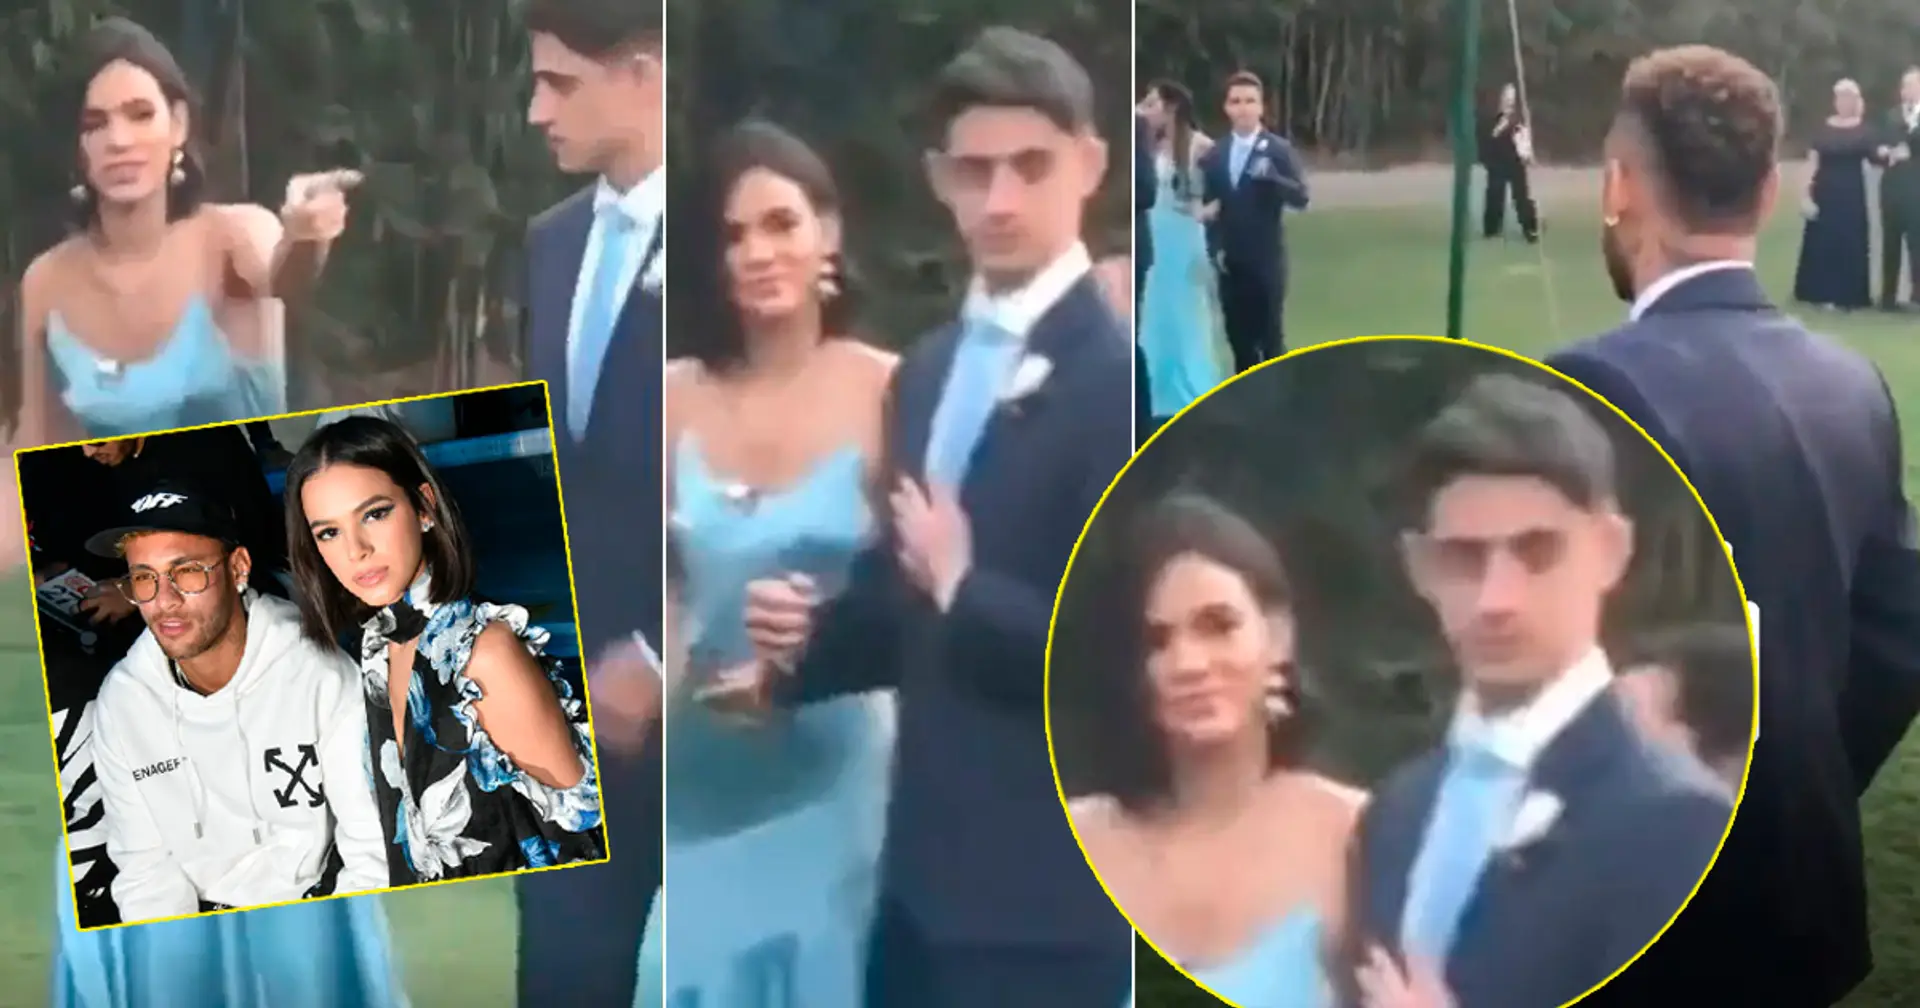 Neymar attends his ex-girlfriend's wedding. I've already watched it 74 times and want more